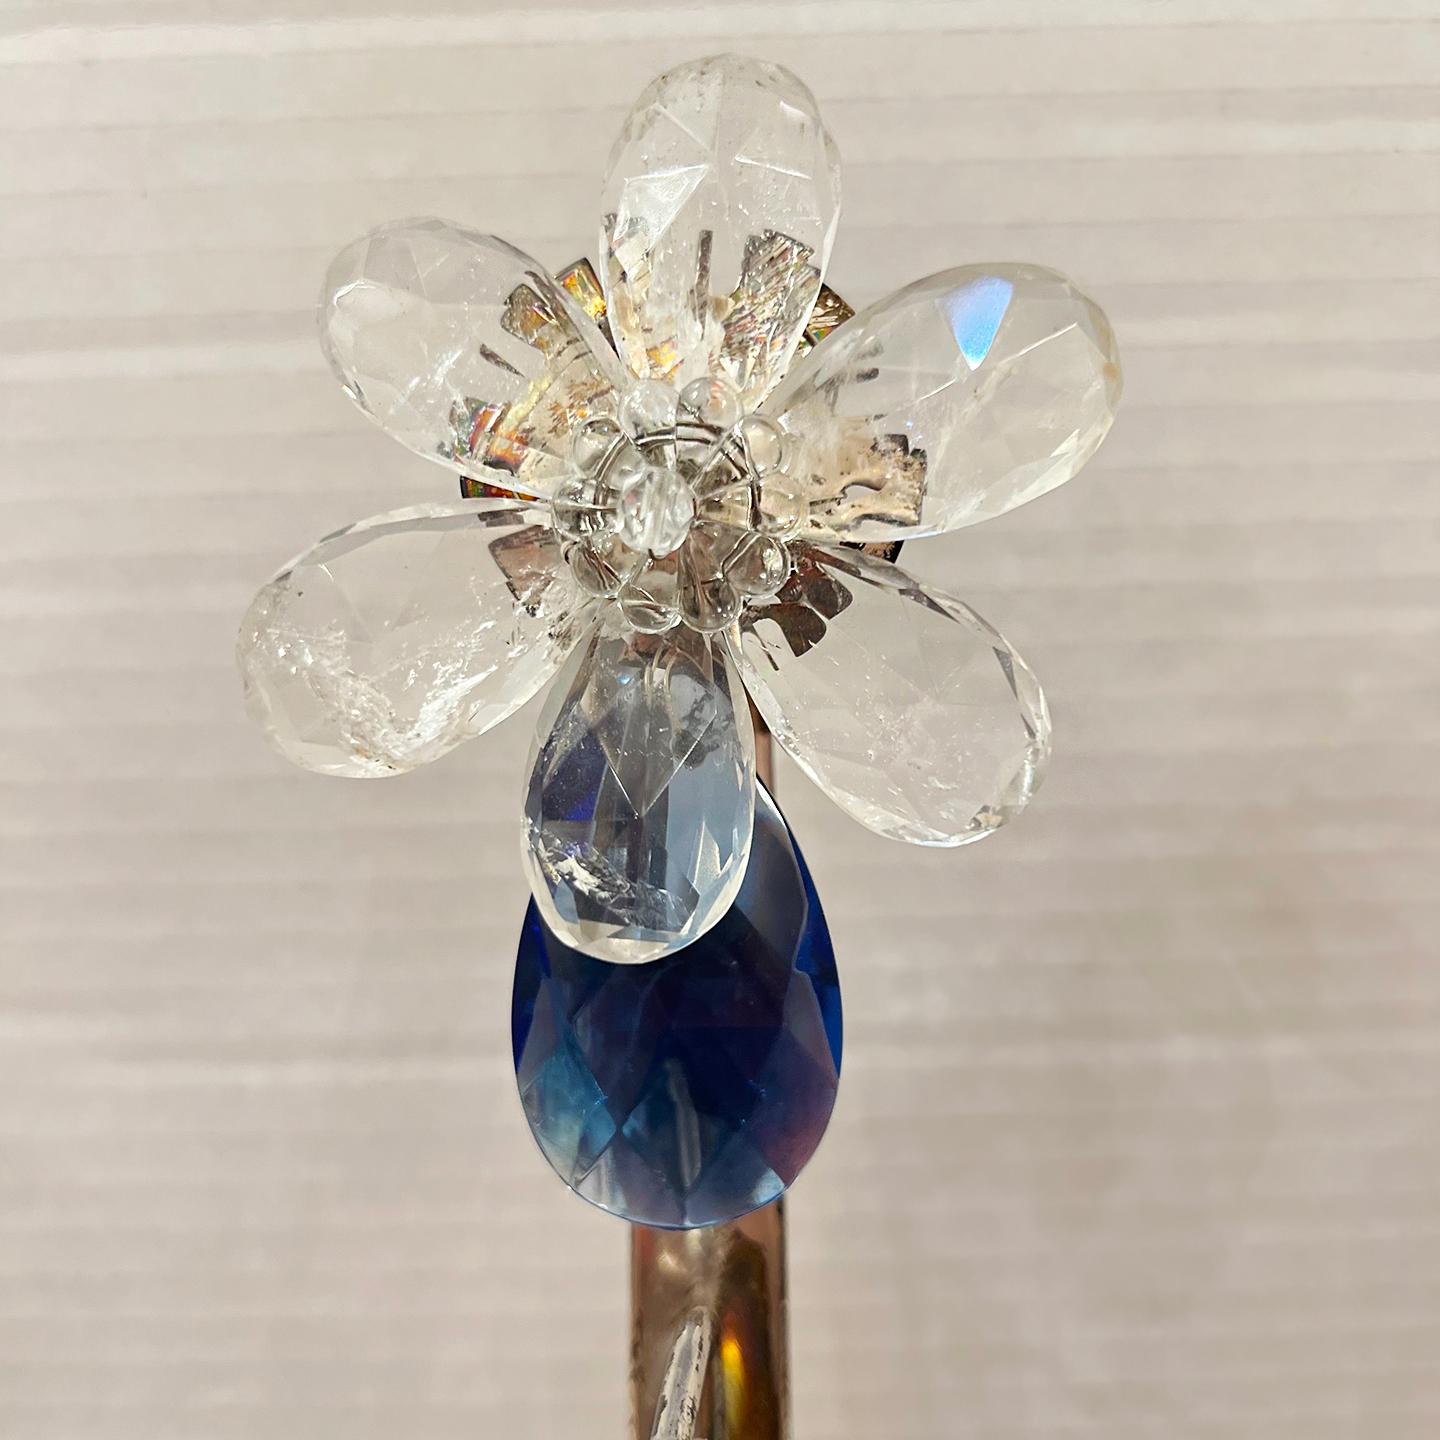 Set of four French circa 1940's silver-plated sconces with blue crystal and rock crystal flowers. Sold per pair.

Measurements:
Height: 21.75